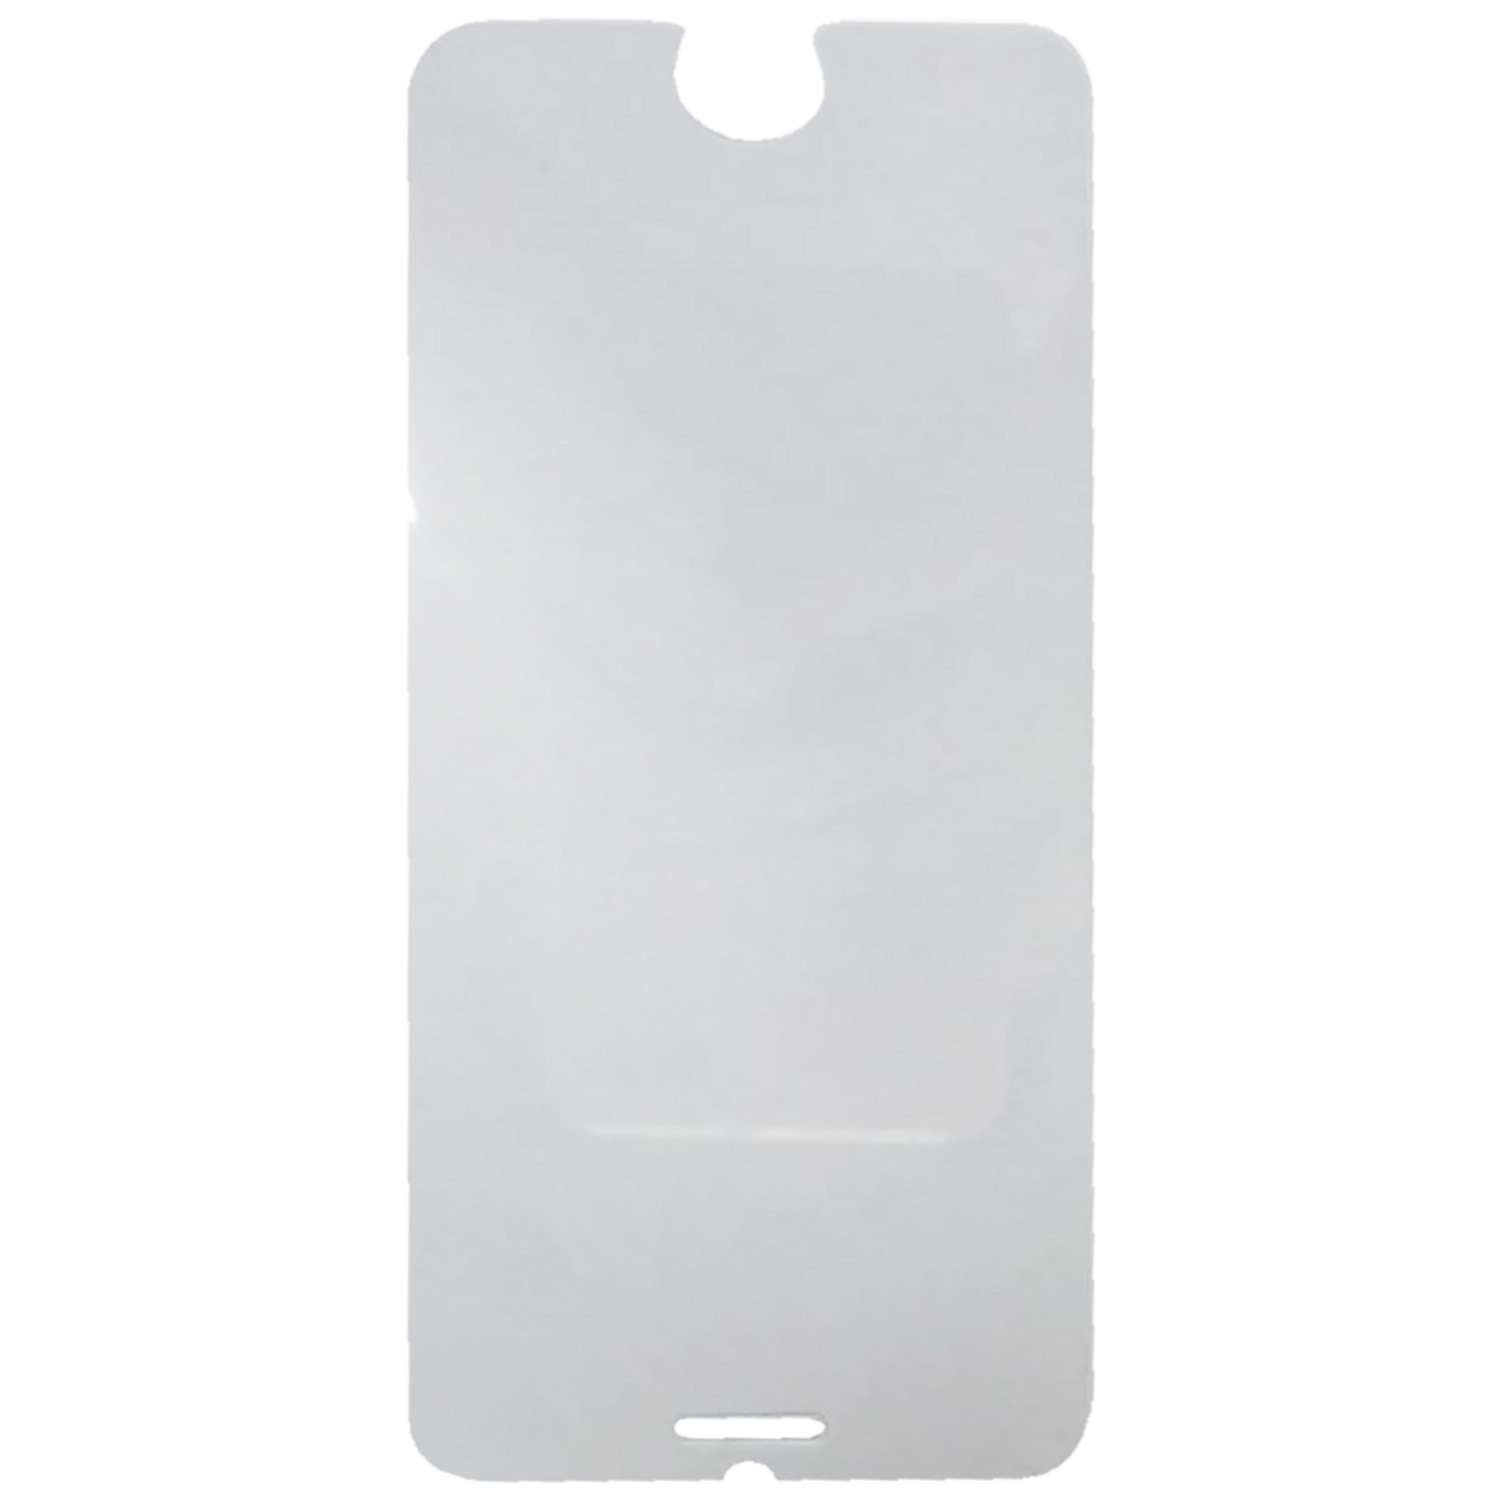 Pack of 2 iPhone 6/7/8 Screen Protectors Image